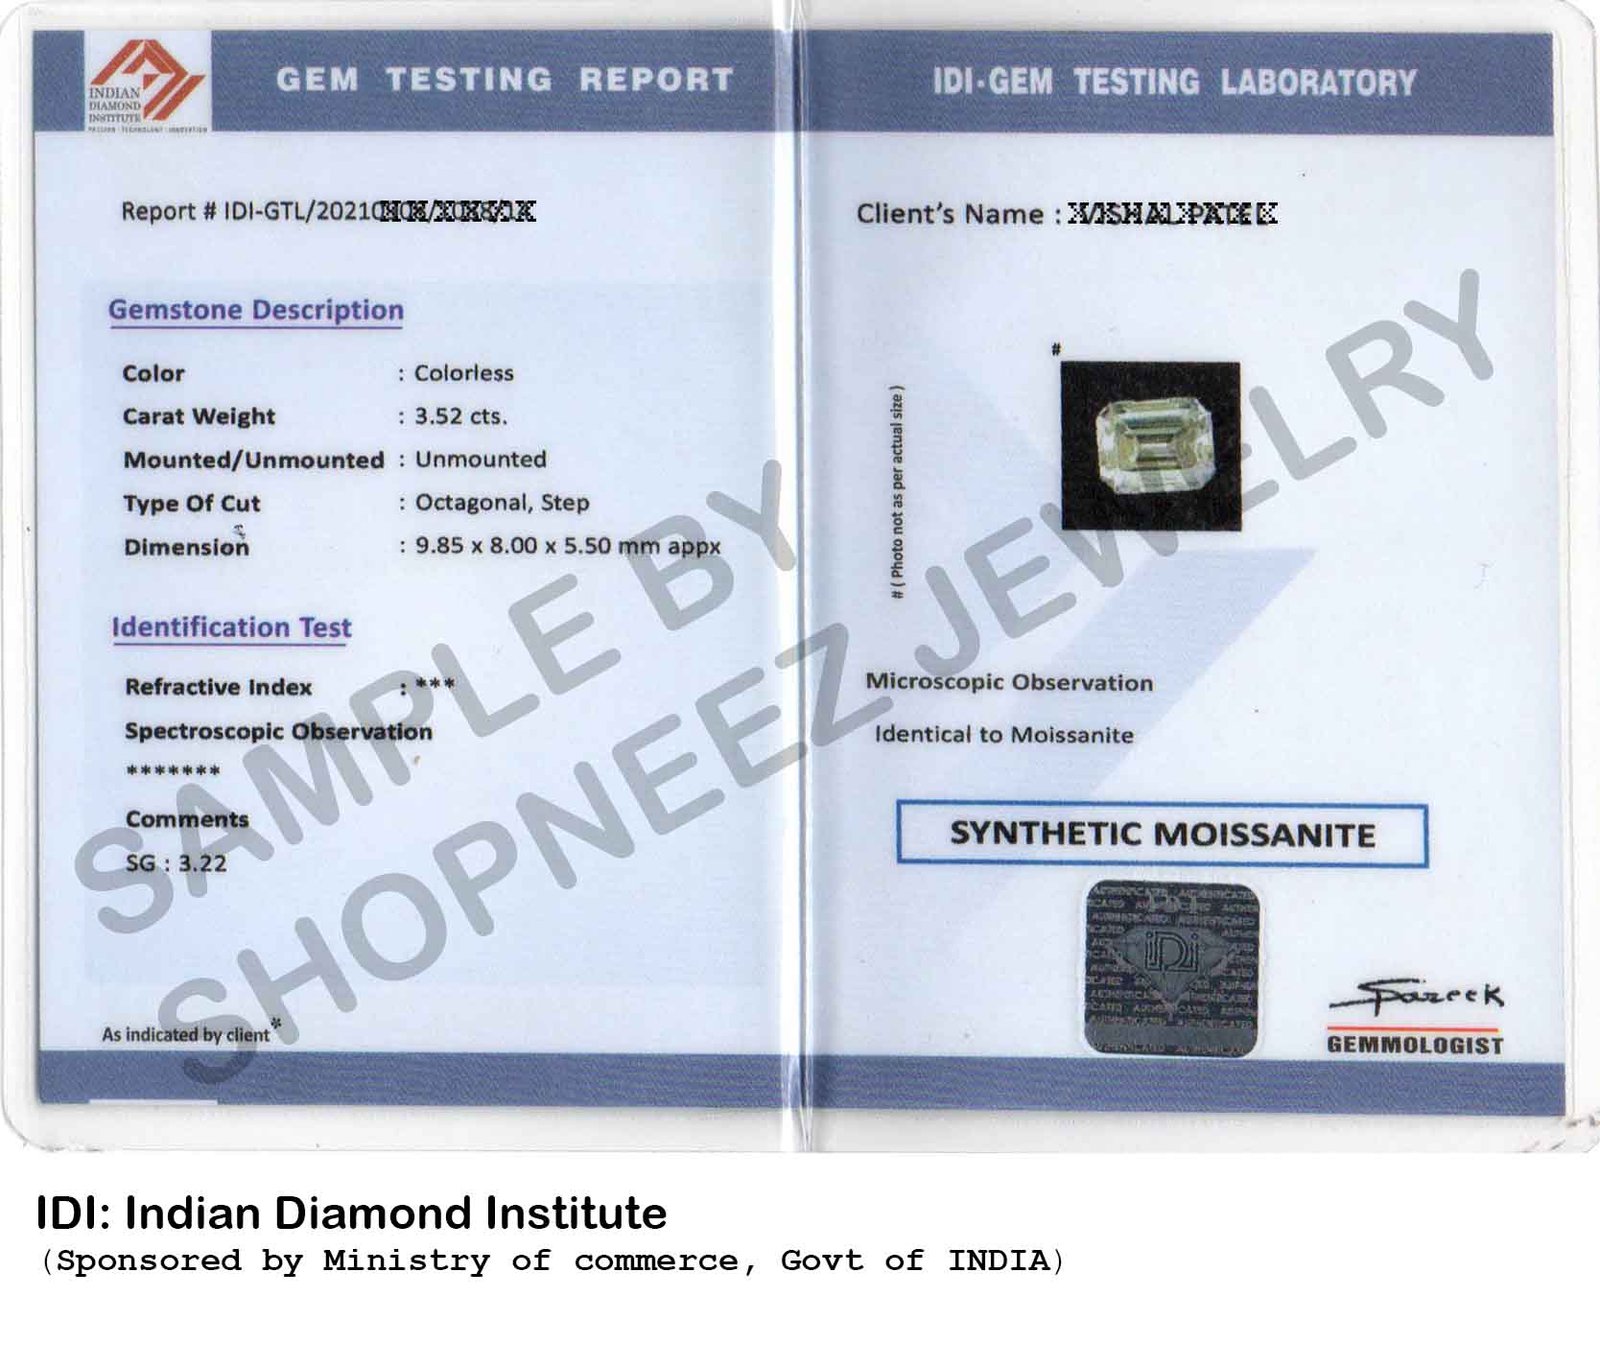 Do you want Moissanite Certification?